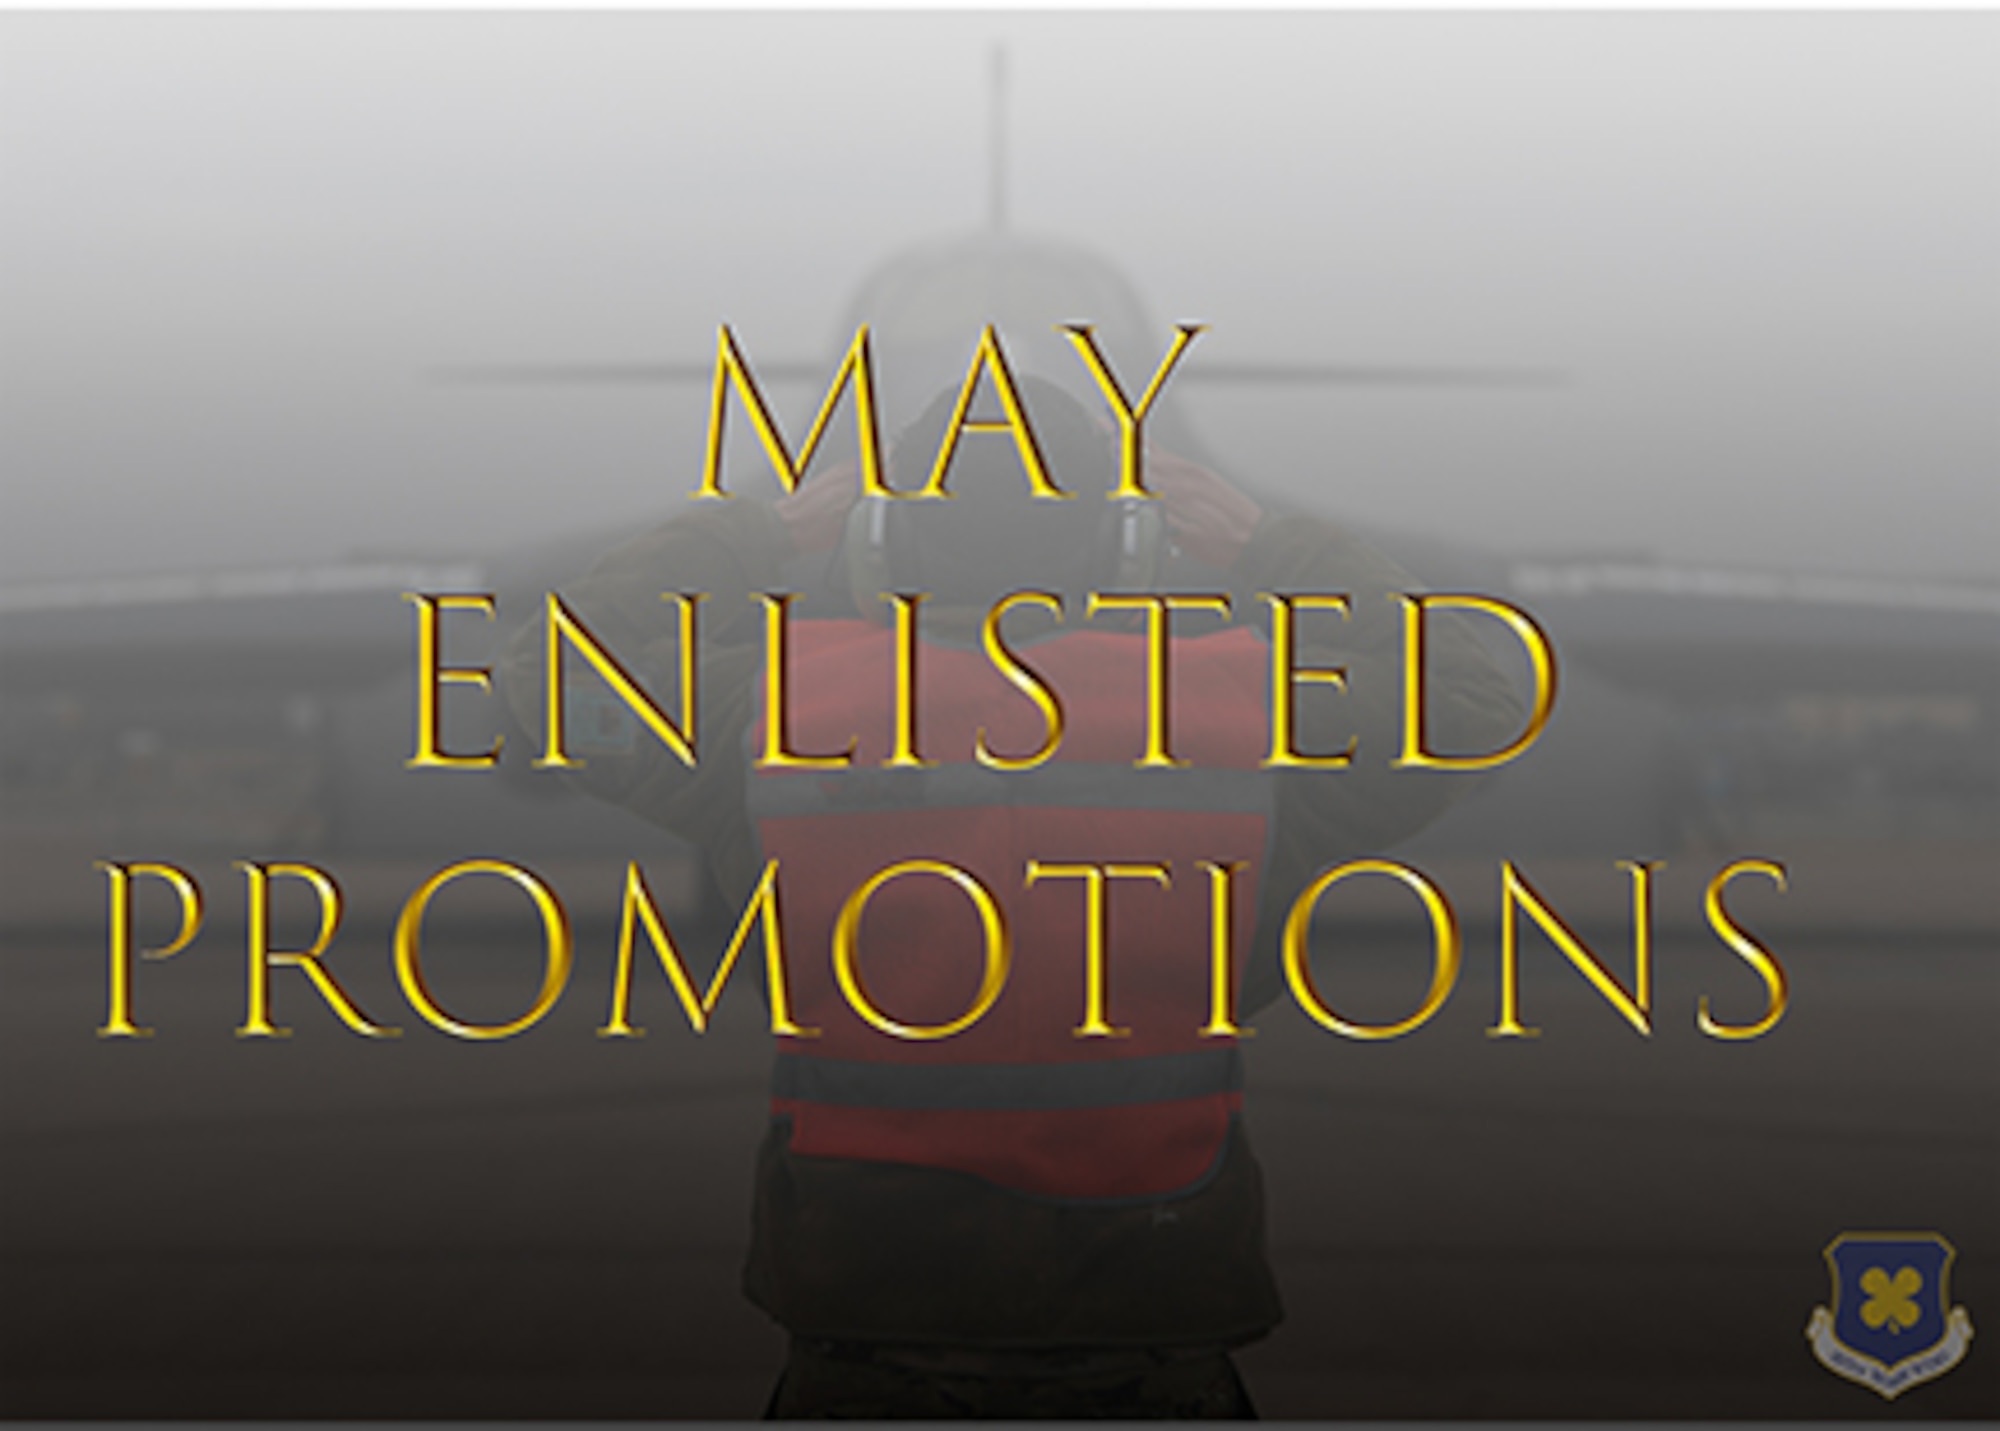 Photo Airman marshalling B-1 Bomber. Text " May Enlisted Promotions" is overlaid.